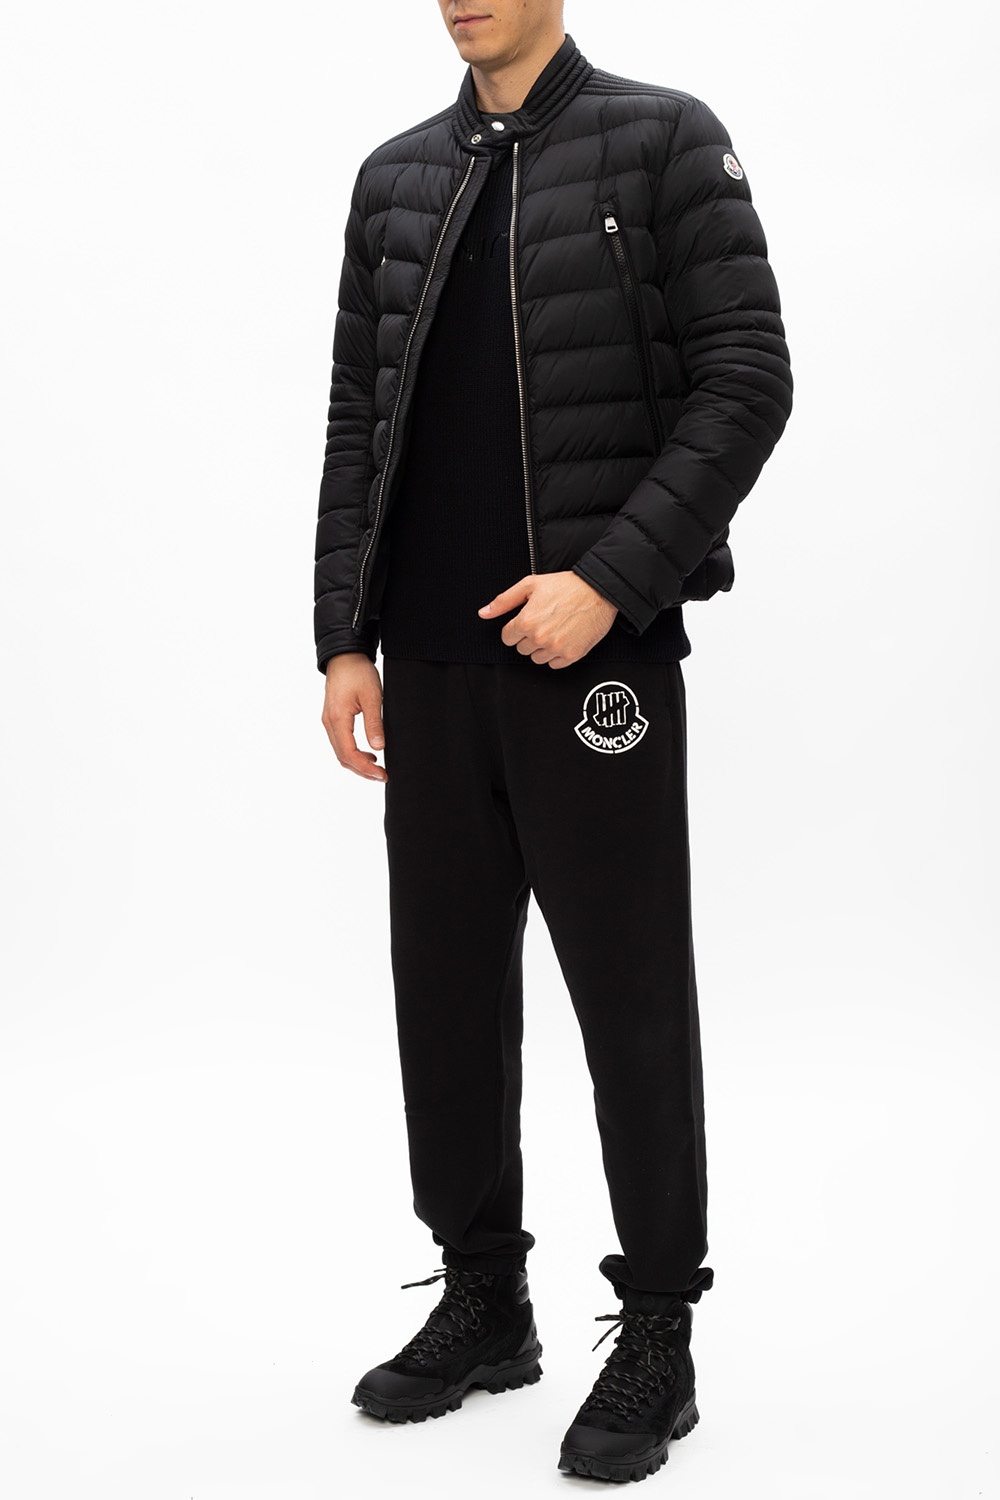 Moncler 'Amiot' quilted down jacket | Men's Clothing | Vitkac